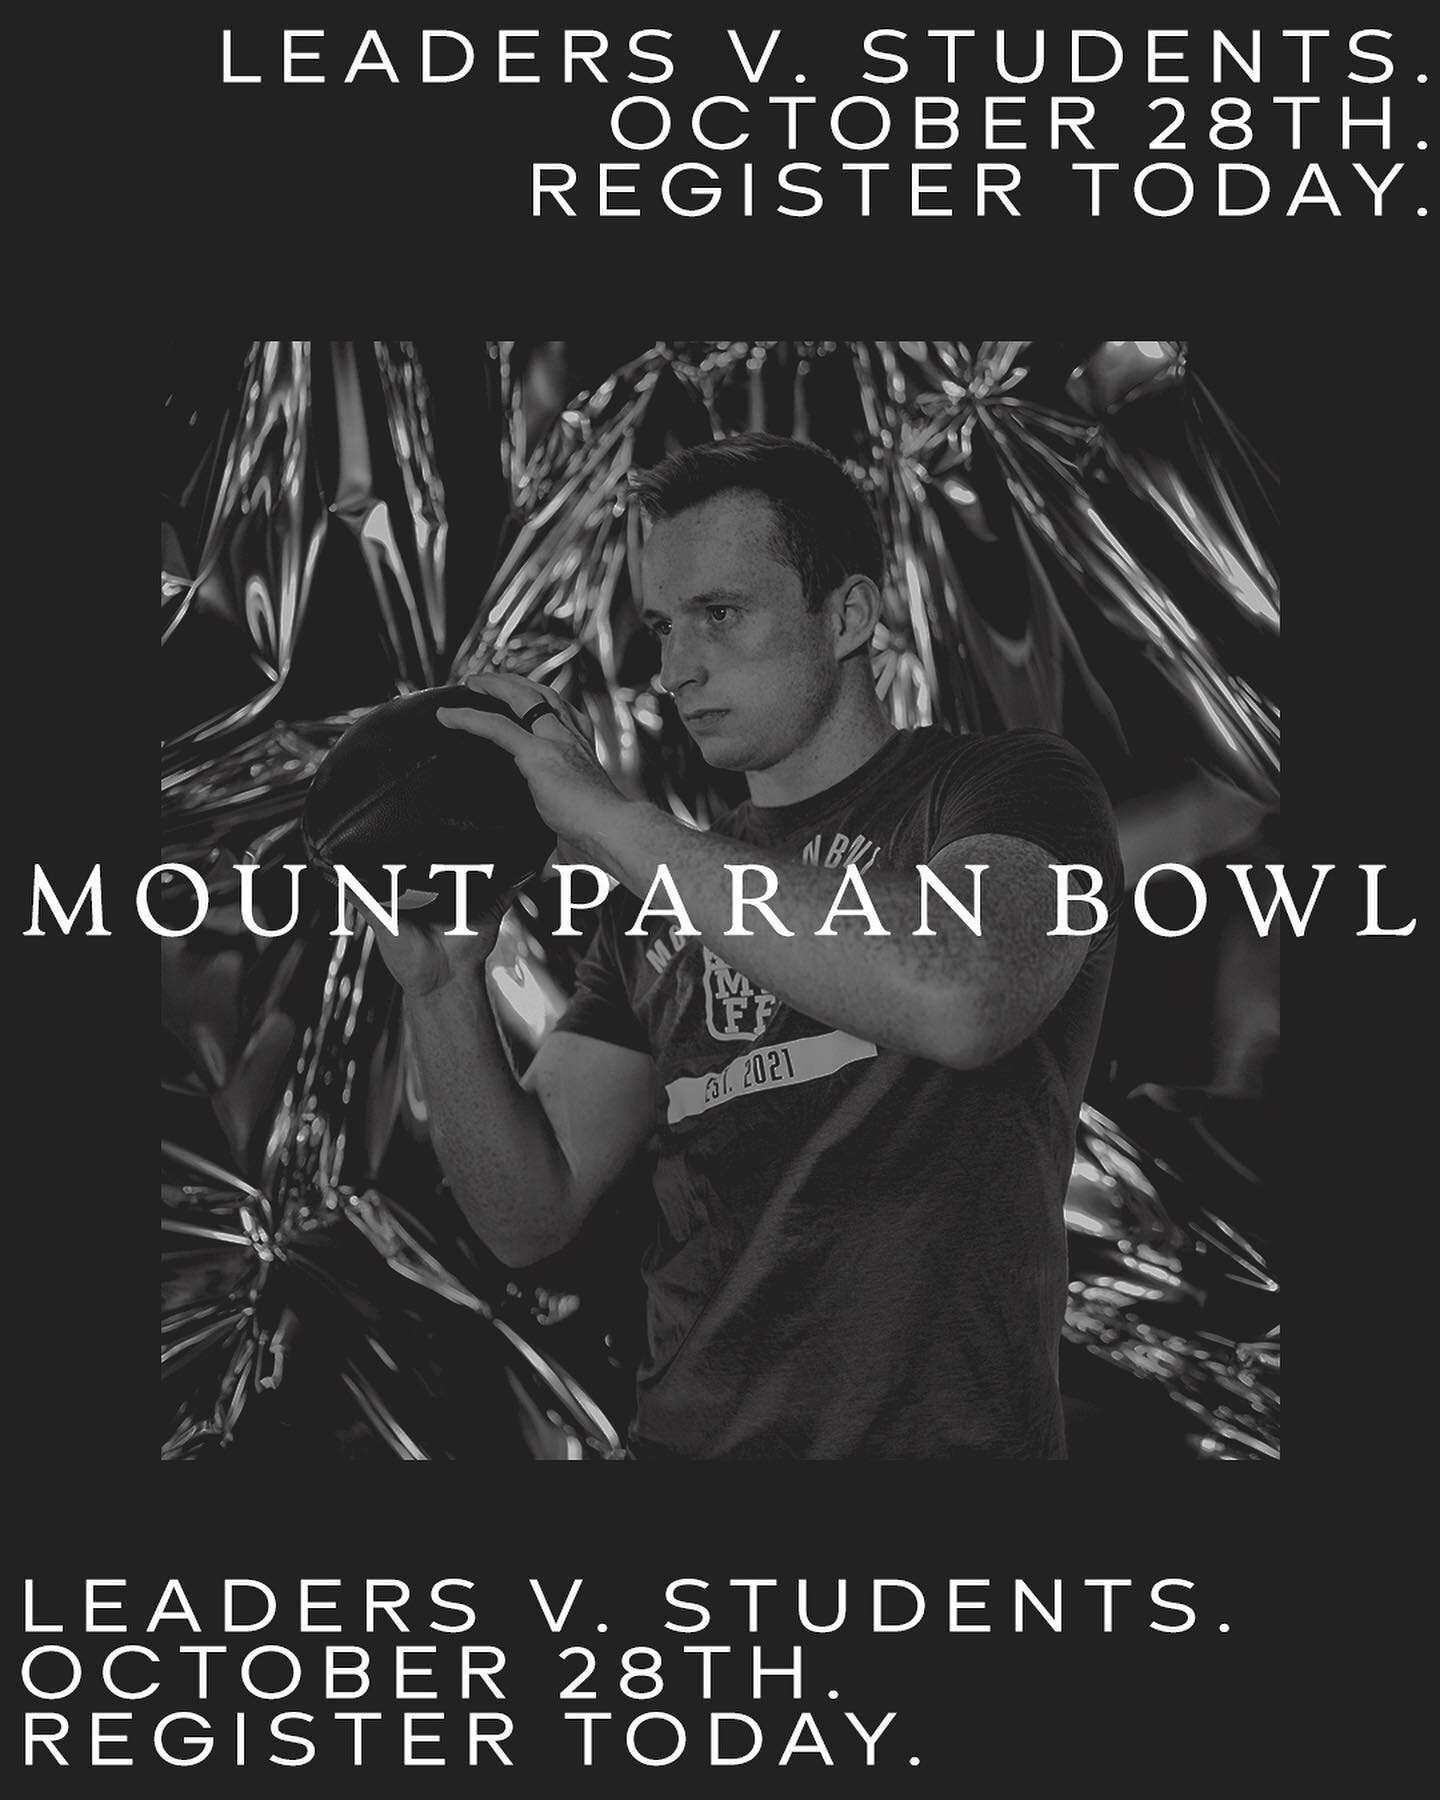 MP BOWL | MPY YM

Our THIRD ANNUAL MP BOWL is coming and we want to know:
DO YOU HAVE WHAT IT TAKES TO TAKE ON THE LEADERS ON OCTOBER 28th? 

Register today! 

#MountParanChurch #MountParanYouth #Atlanta #AtlantaChristians #AtlantaYouth #HighSchool #